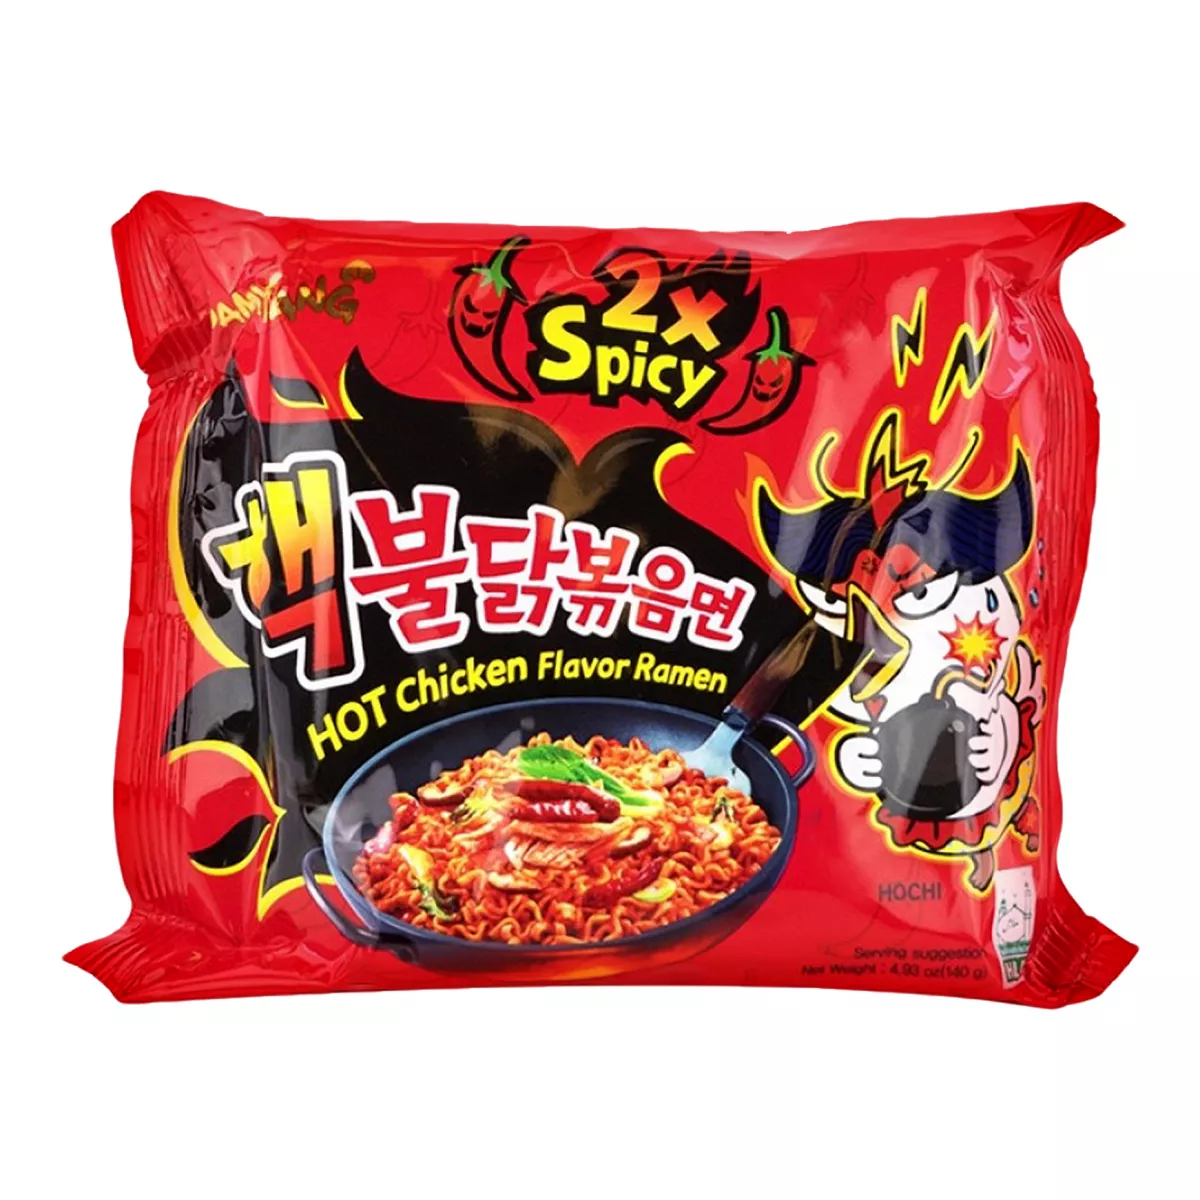 Taitei instant 2 x Fried spicy chicken SY 140g, [],asianfood.ro